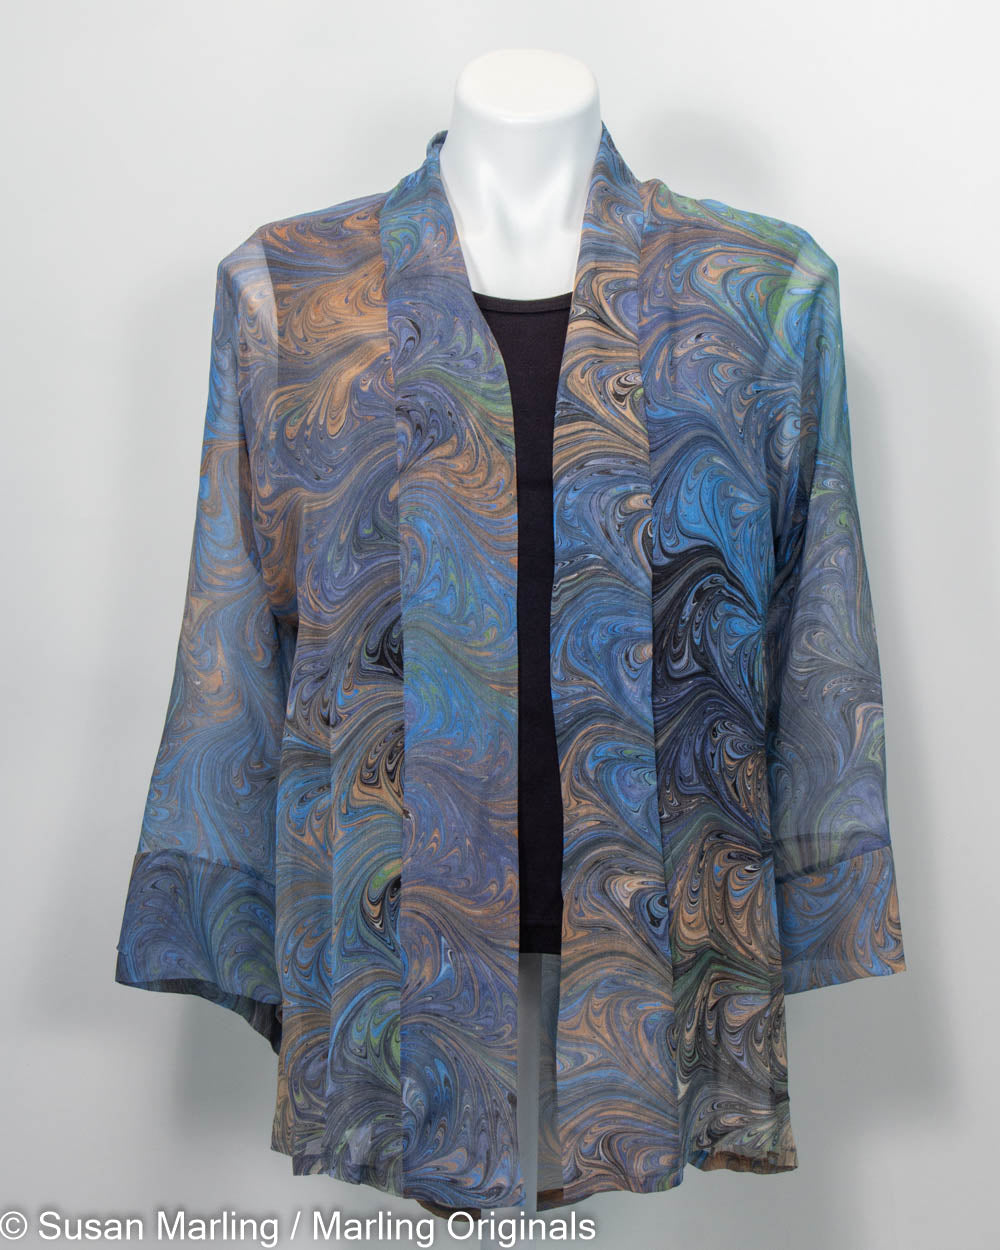 sheer silk kimono jacket in deep grey with peach, black and powder blue marbled pattern